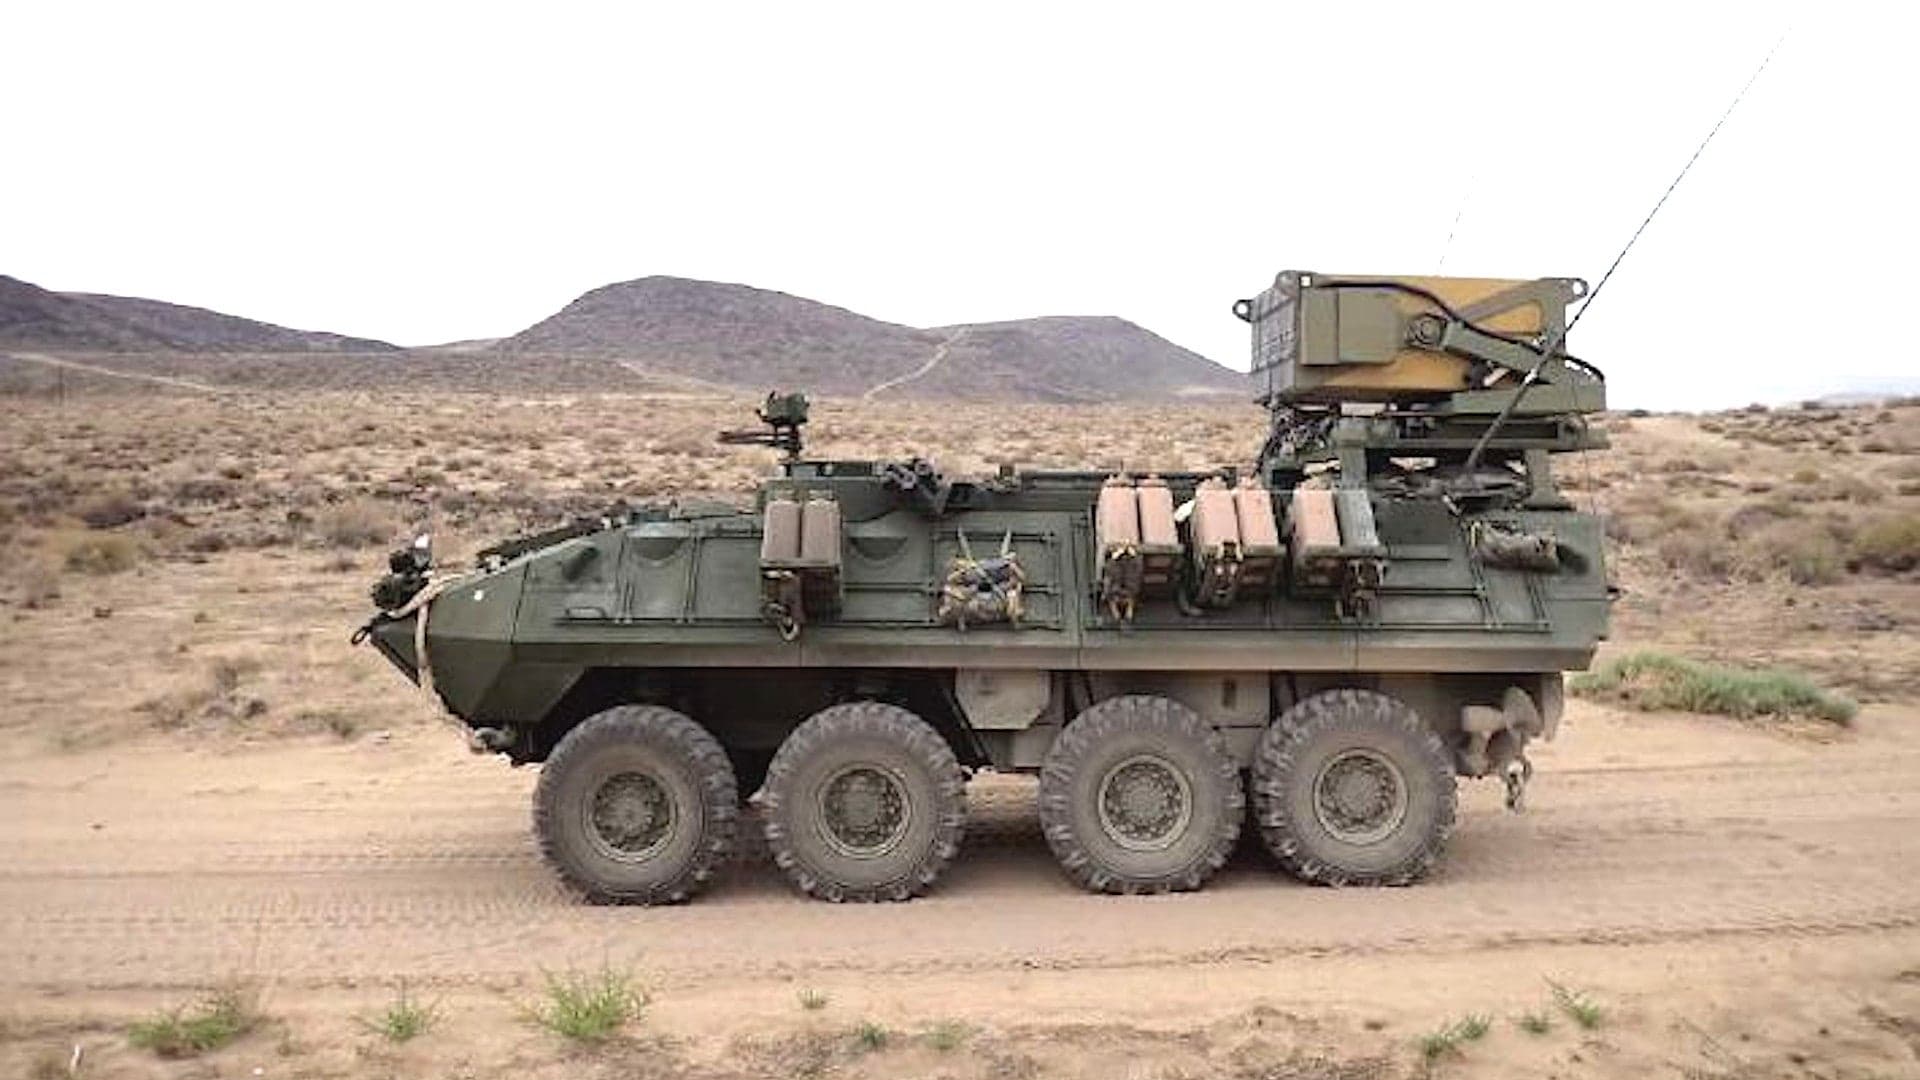 This Is Our First Look At The Marines’ Loitering Munition-Armed Light Armored Vehicle